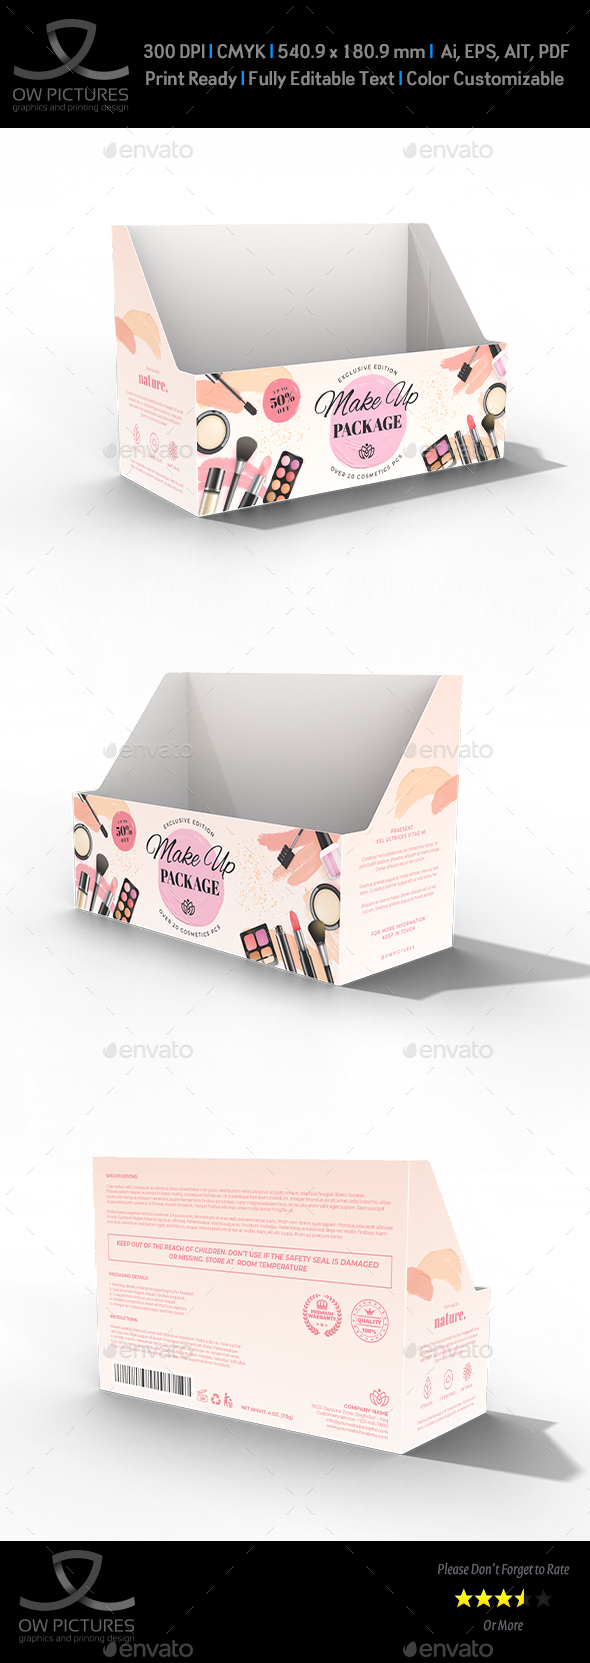 [DOWNLOAD]Cosmetics Box Template for Packaging